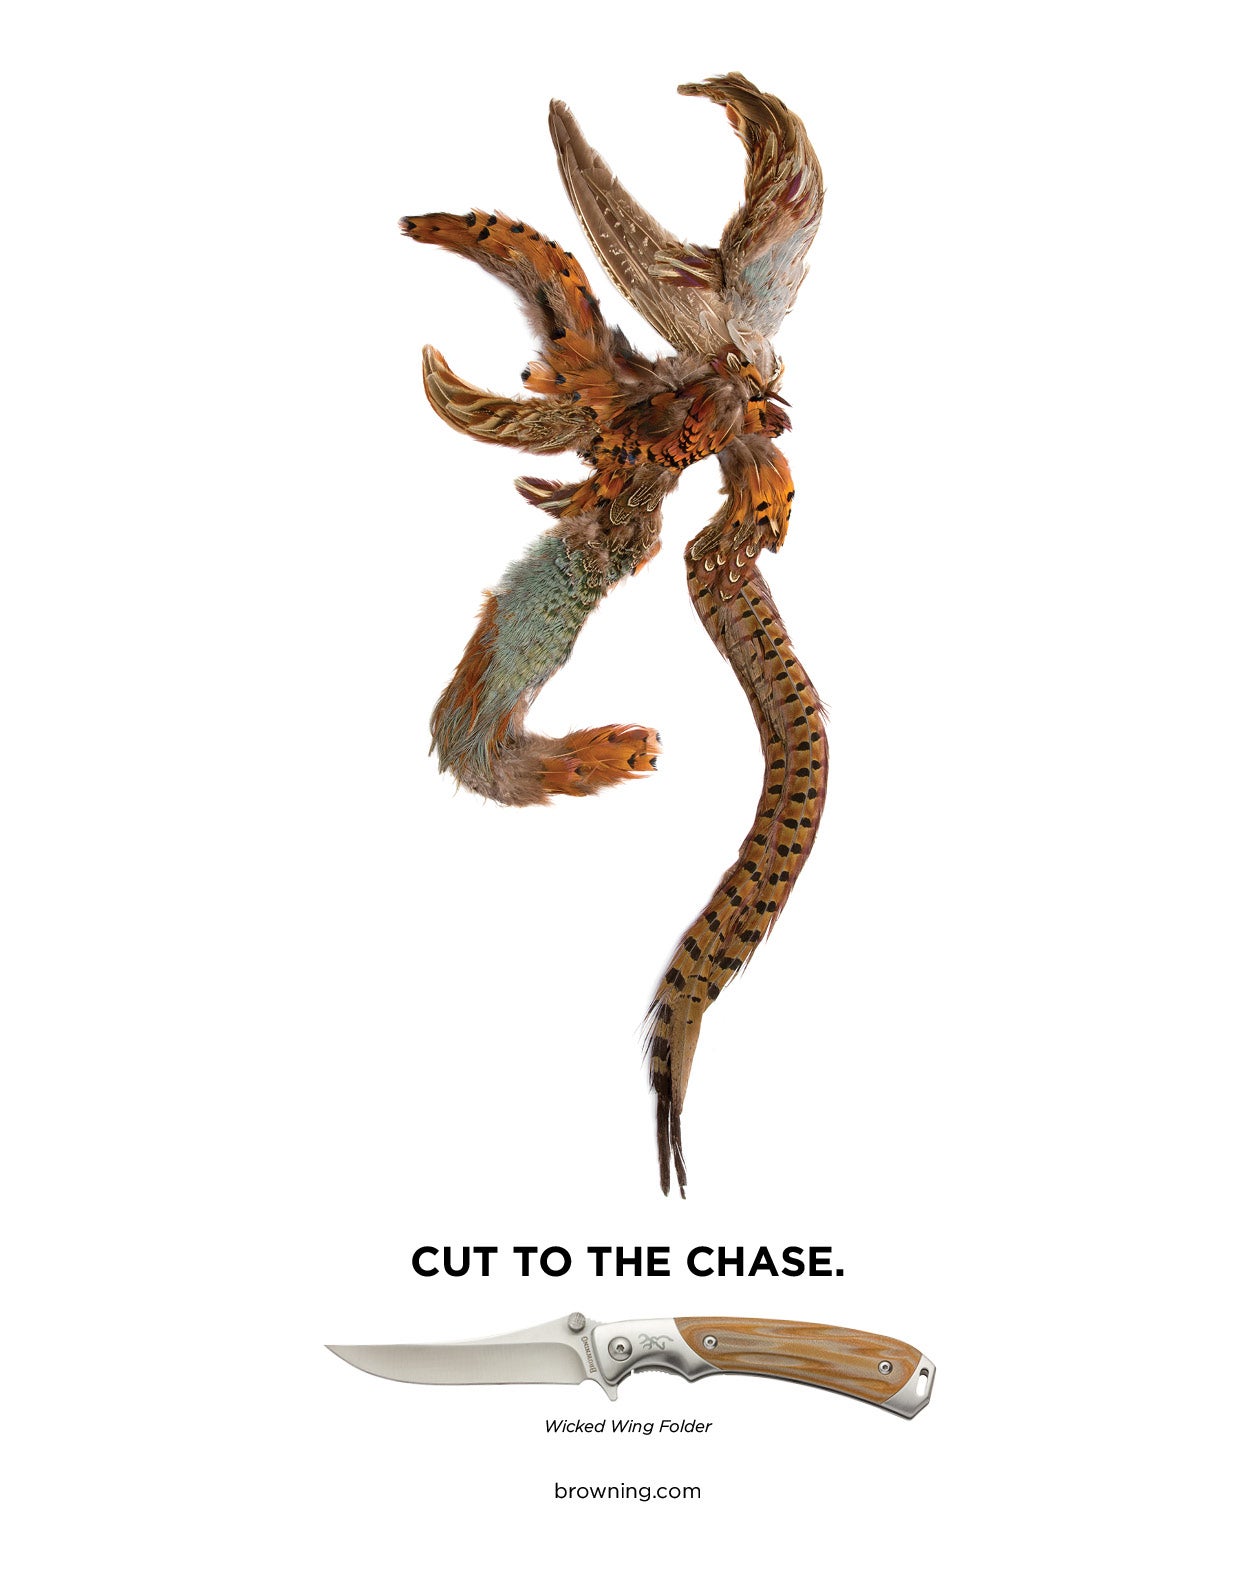 Cut to the chase, Wicked Wing Folding Knife, Buckmark Print ad